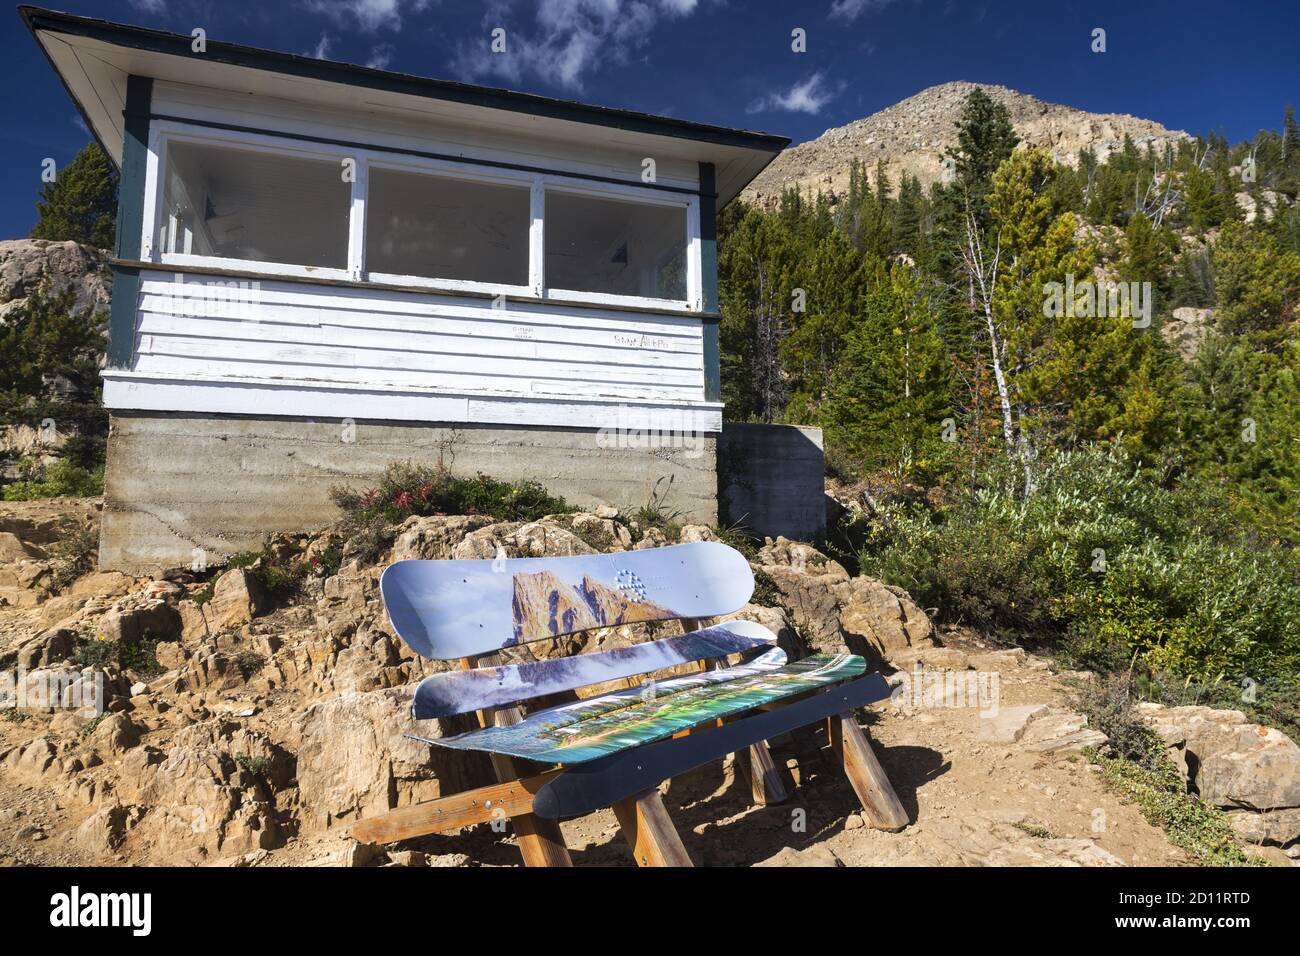 Old Paget Fire Lookout Wood Log Cabin Exterior. Multi Colored Wooden Ski Boards Bench. Yoho National Park Landscape View, Canadian Rocky Mountains Stock Photo